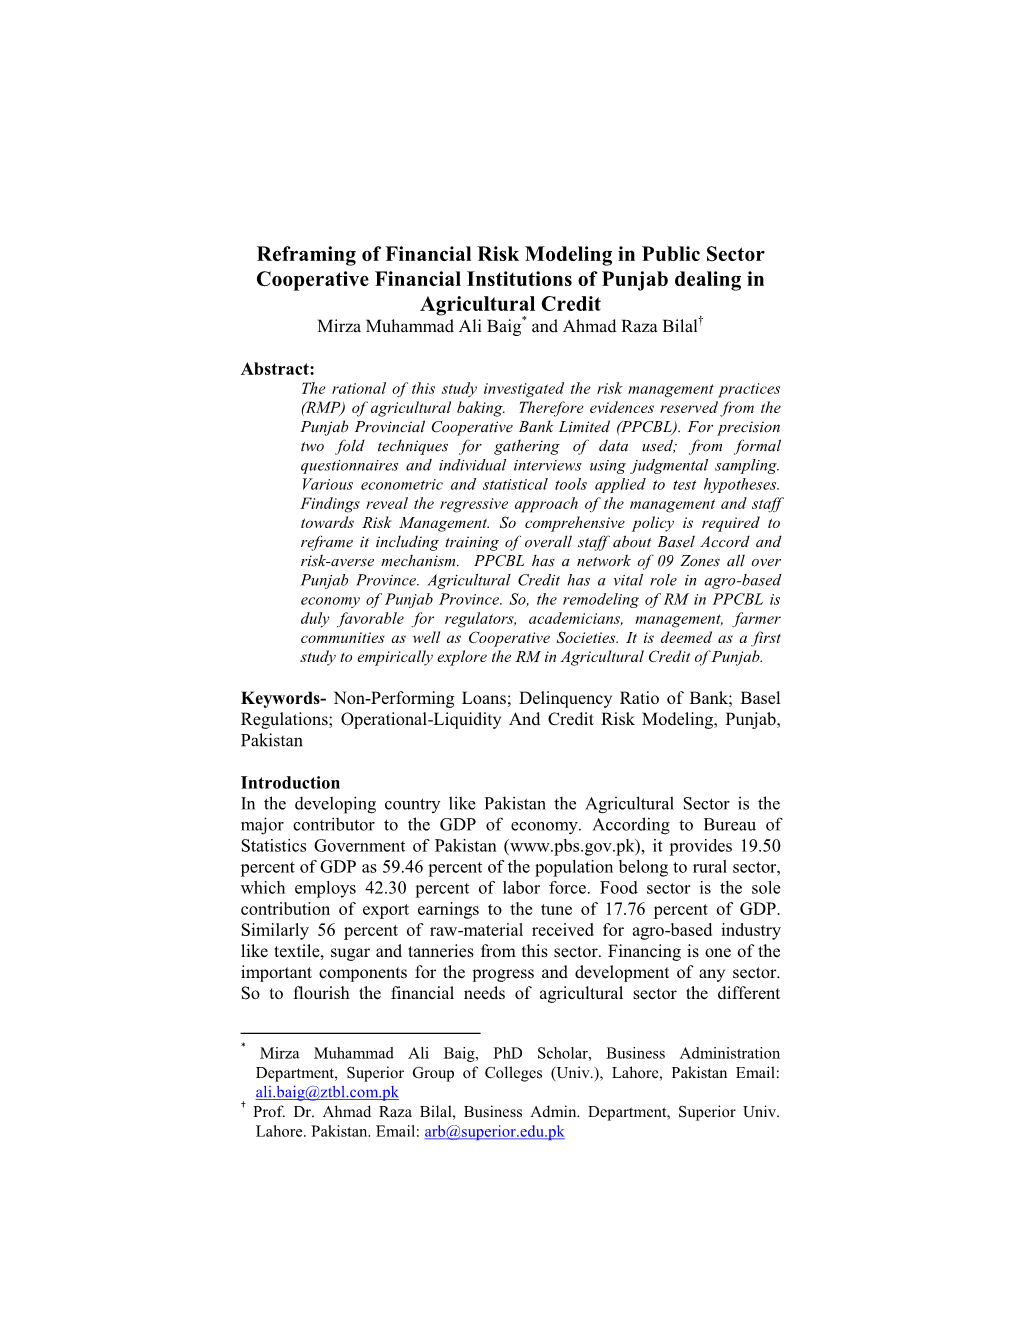 Reframing of Financial Risk Modeling in Public Sector Cooperative